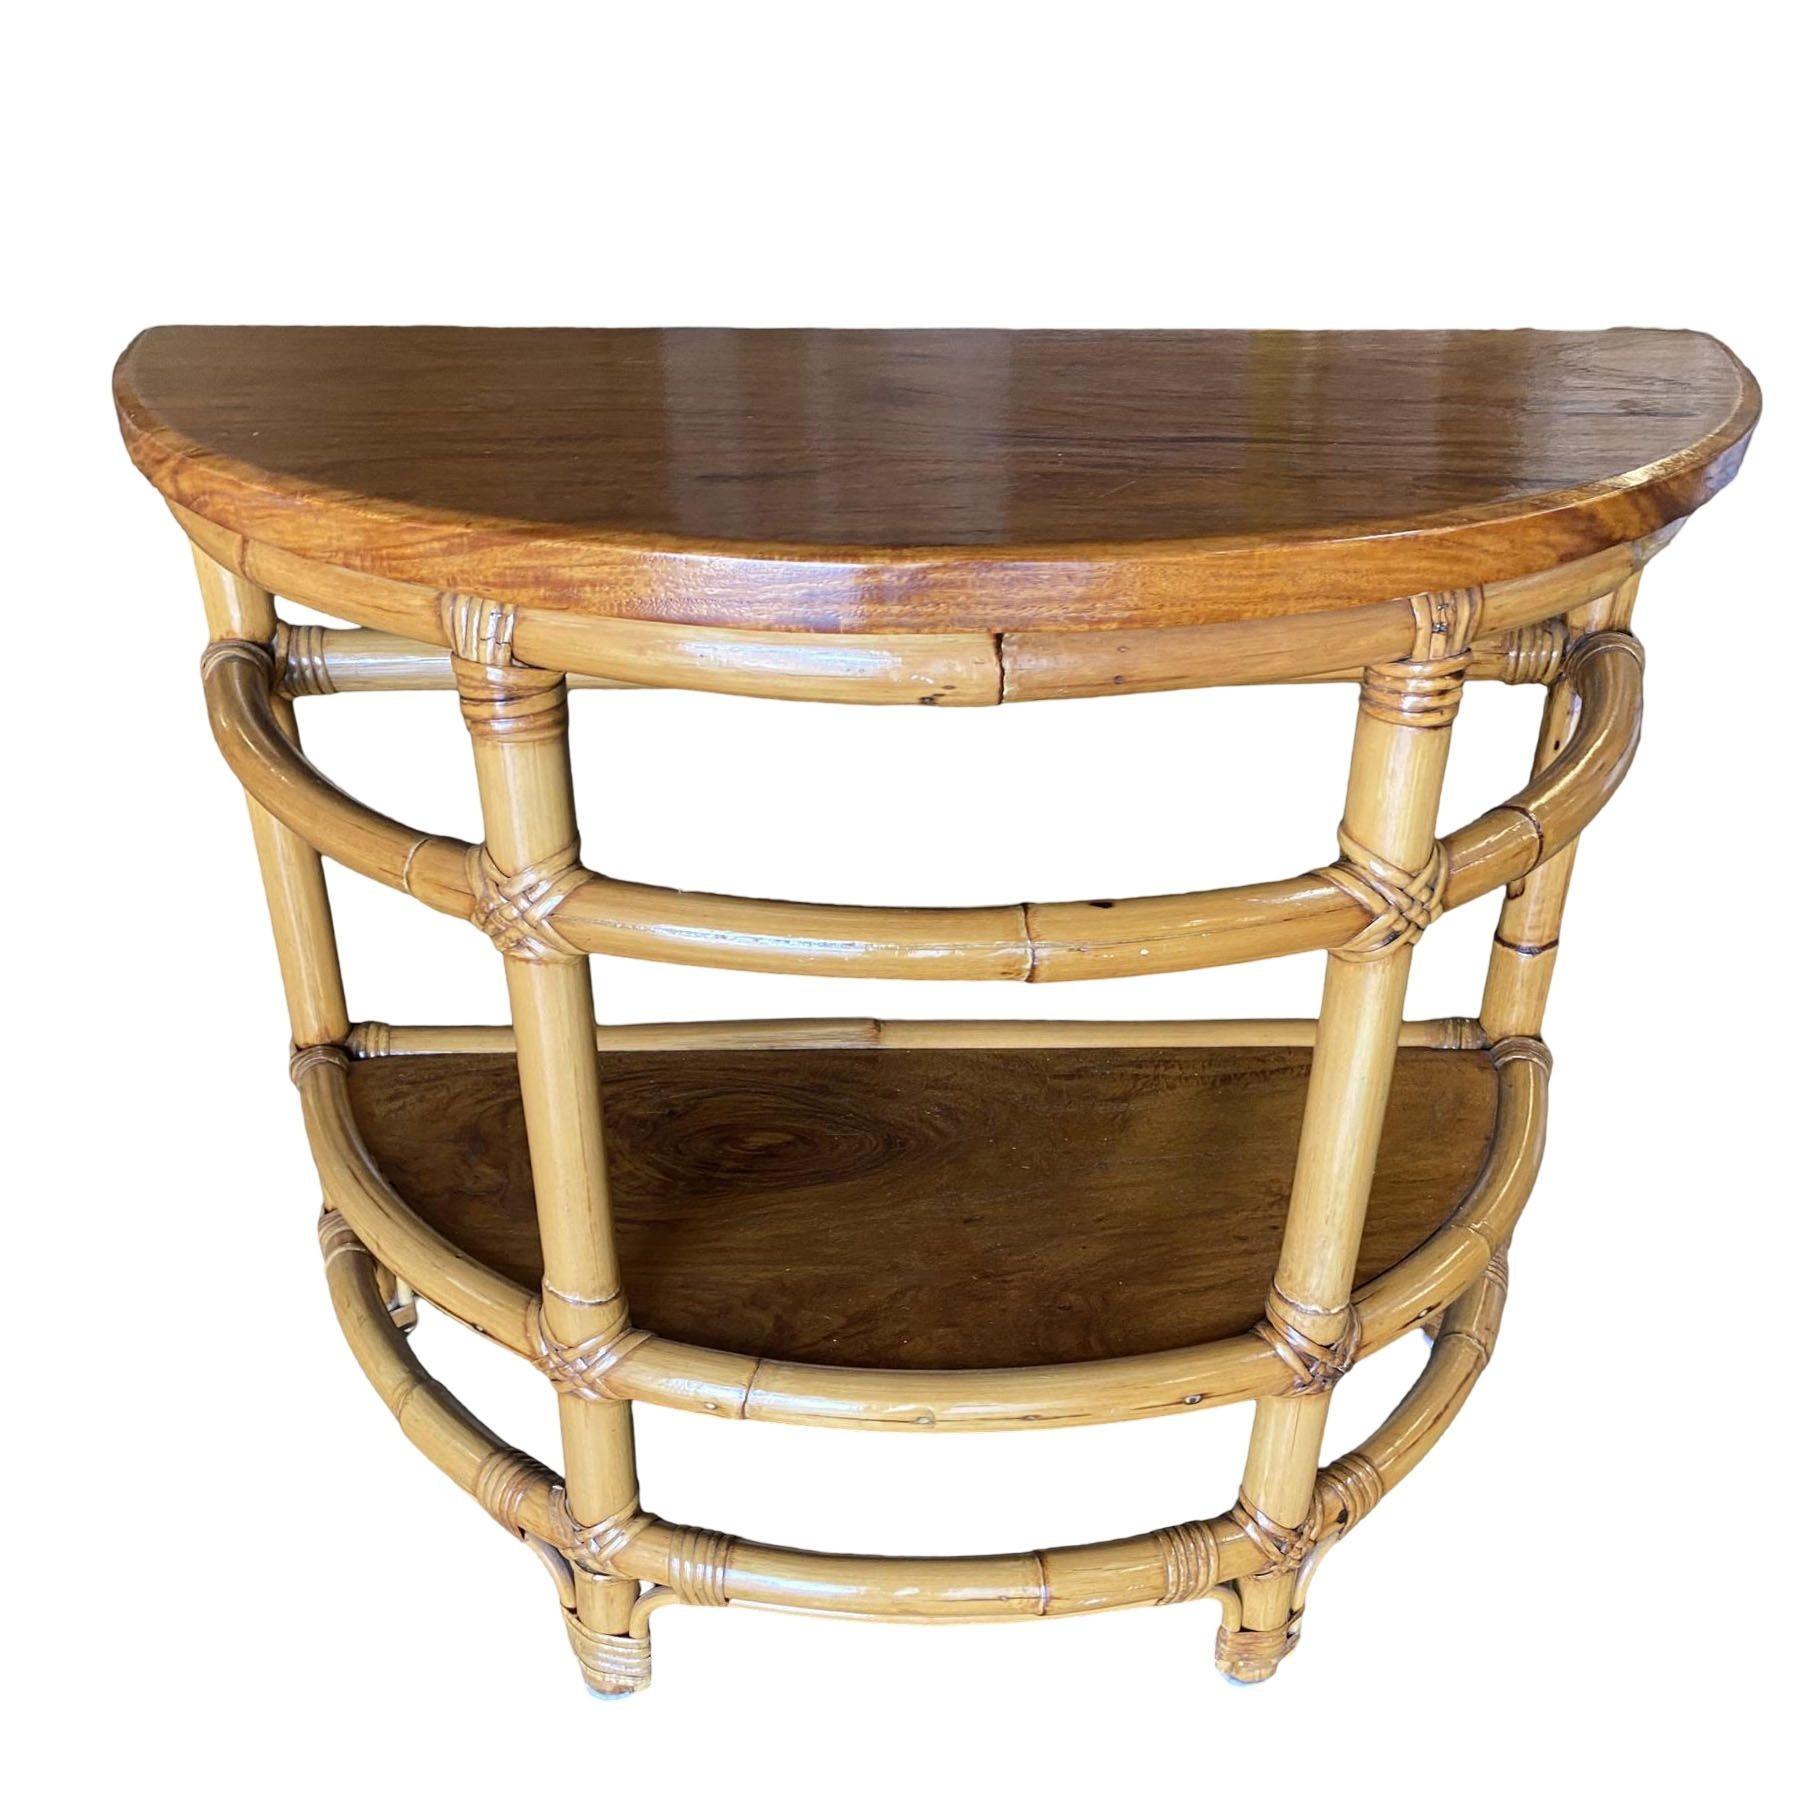 Vintage 1940s two-tier rattan side table featuring stylized single-strand legs, ladder sides, and beautiful half-round mahogany tops.

1950, United States

We only purchase and sell only the best and finest rattan furniture made by the best and